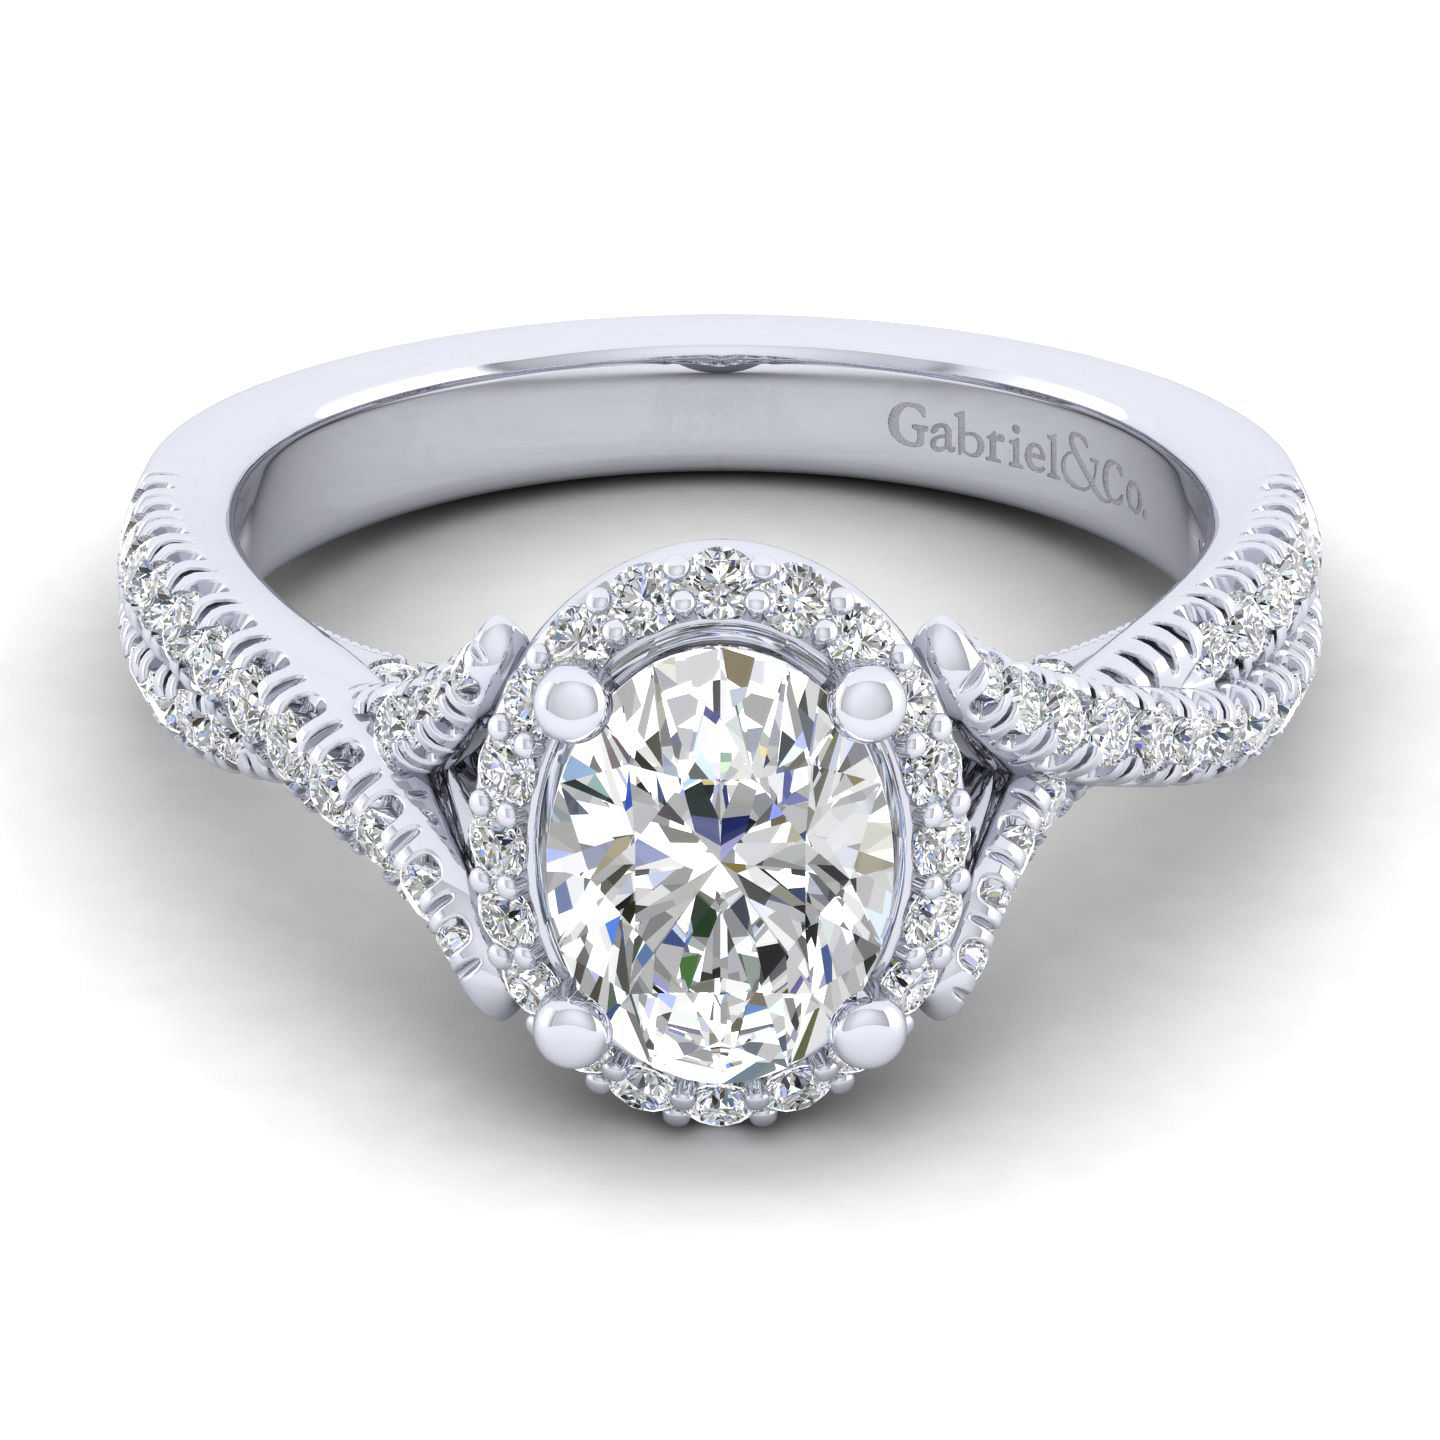 Aster - 14K White Gold Oval Halo Diamond Engagement Ring